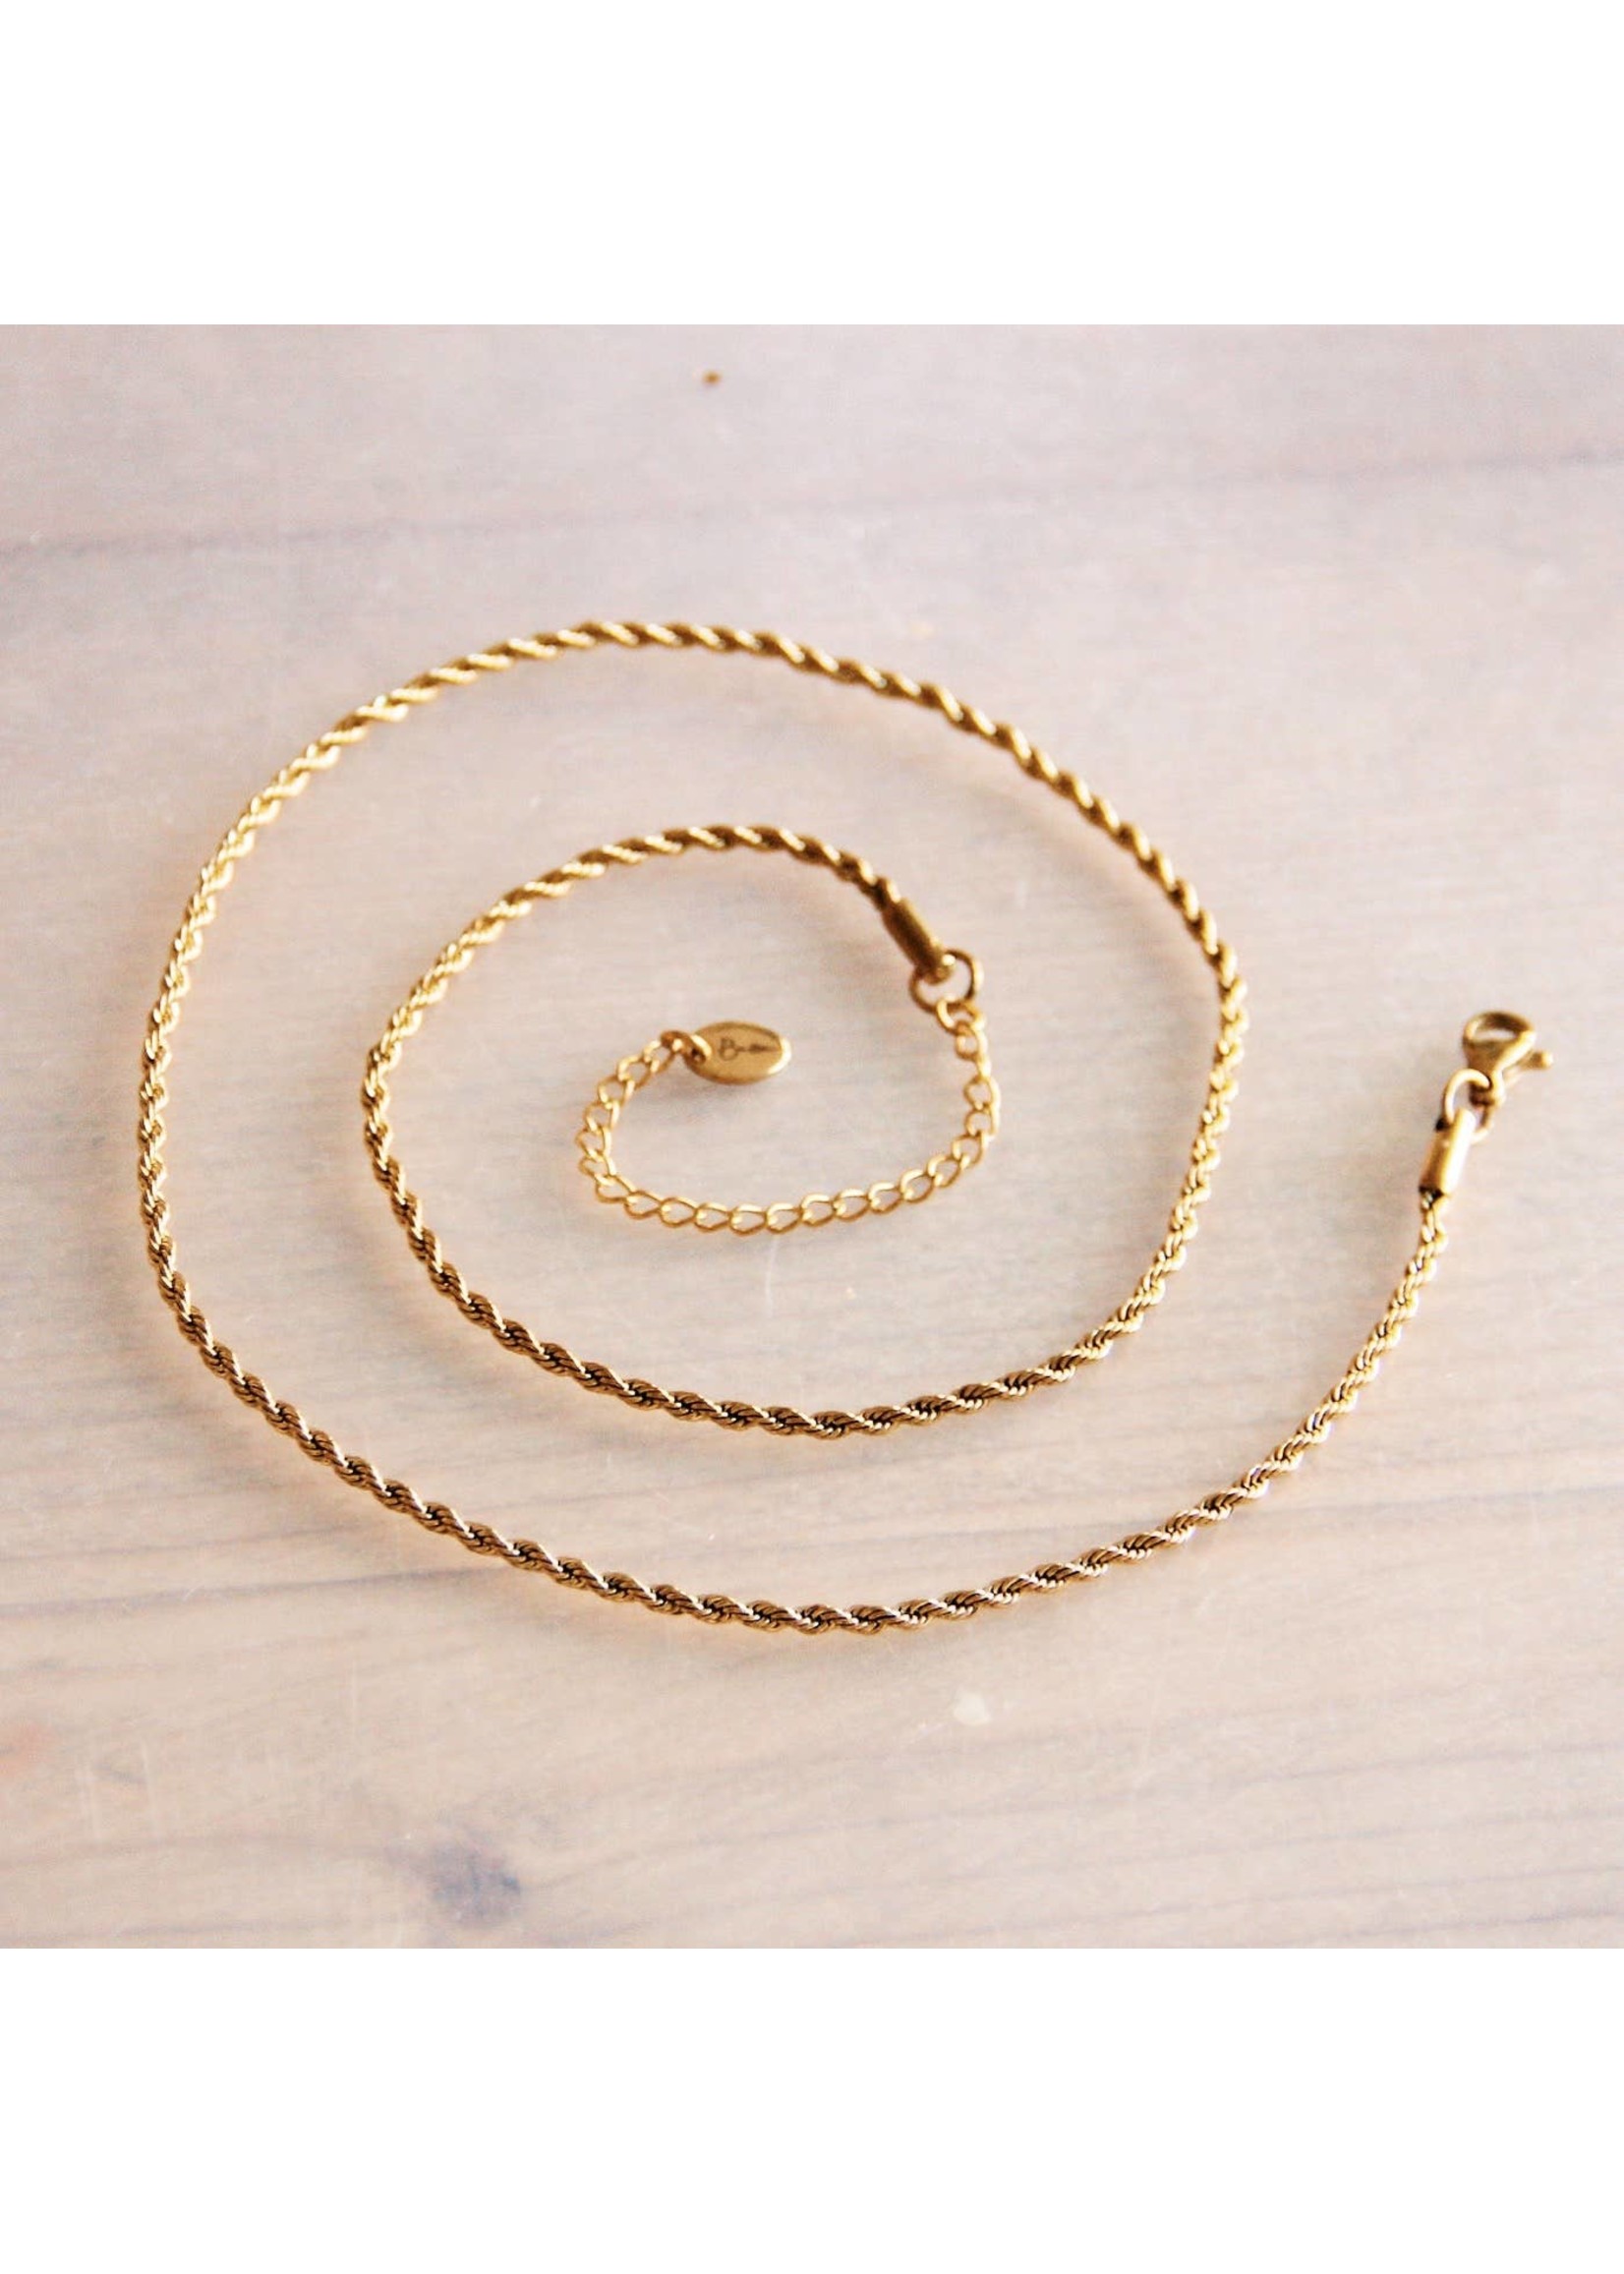 Stainless steel fine twisted necklace – gold